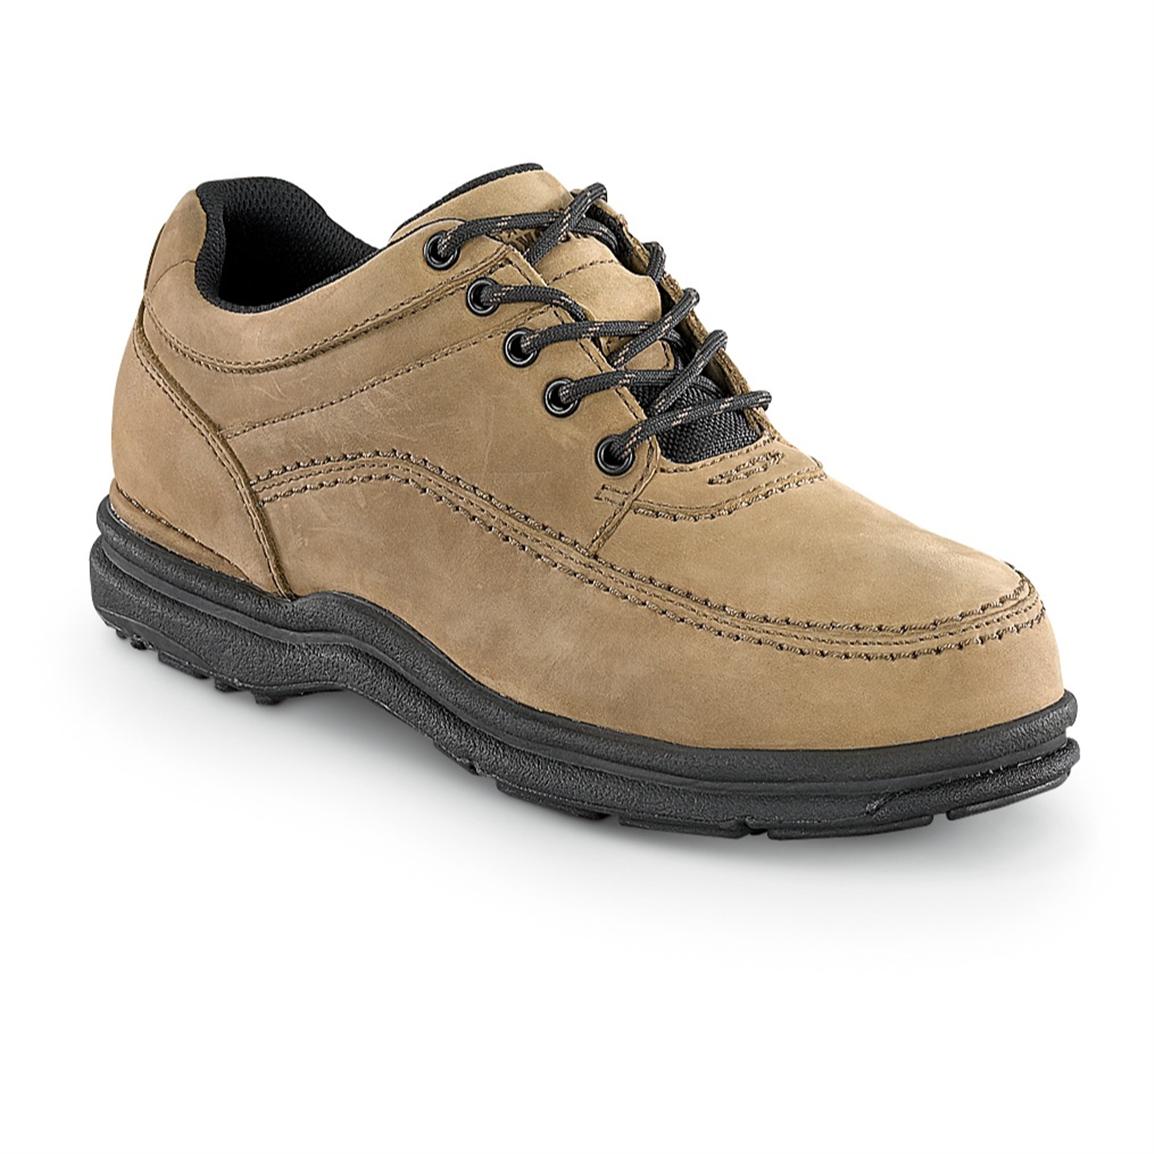 Men's Rockport Works World Tour Steel Toe Casual Shoes, Tan - 208584 ...